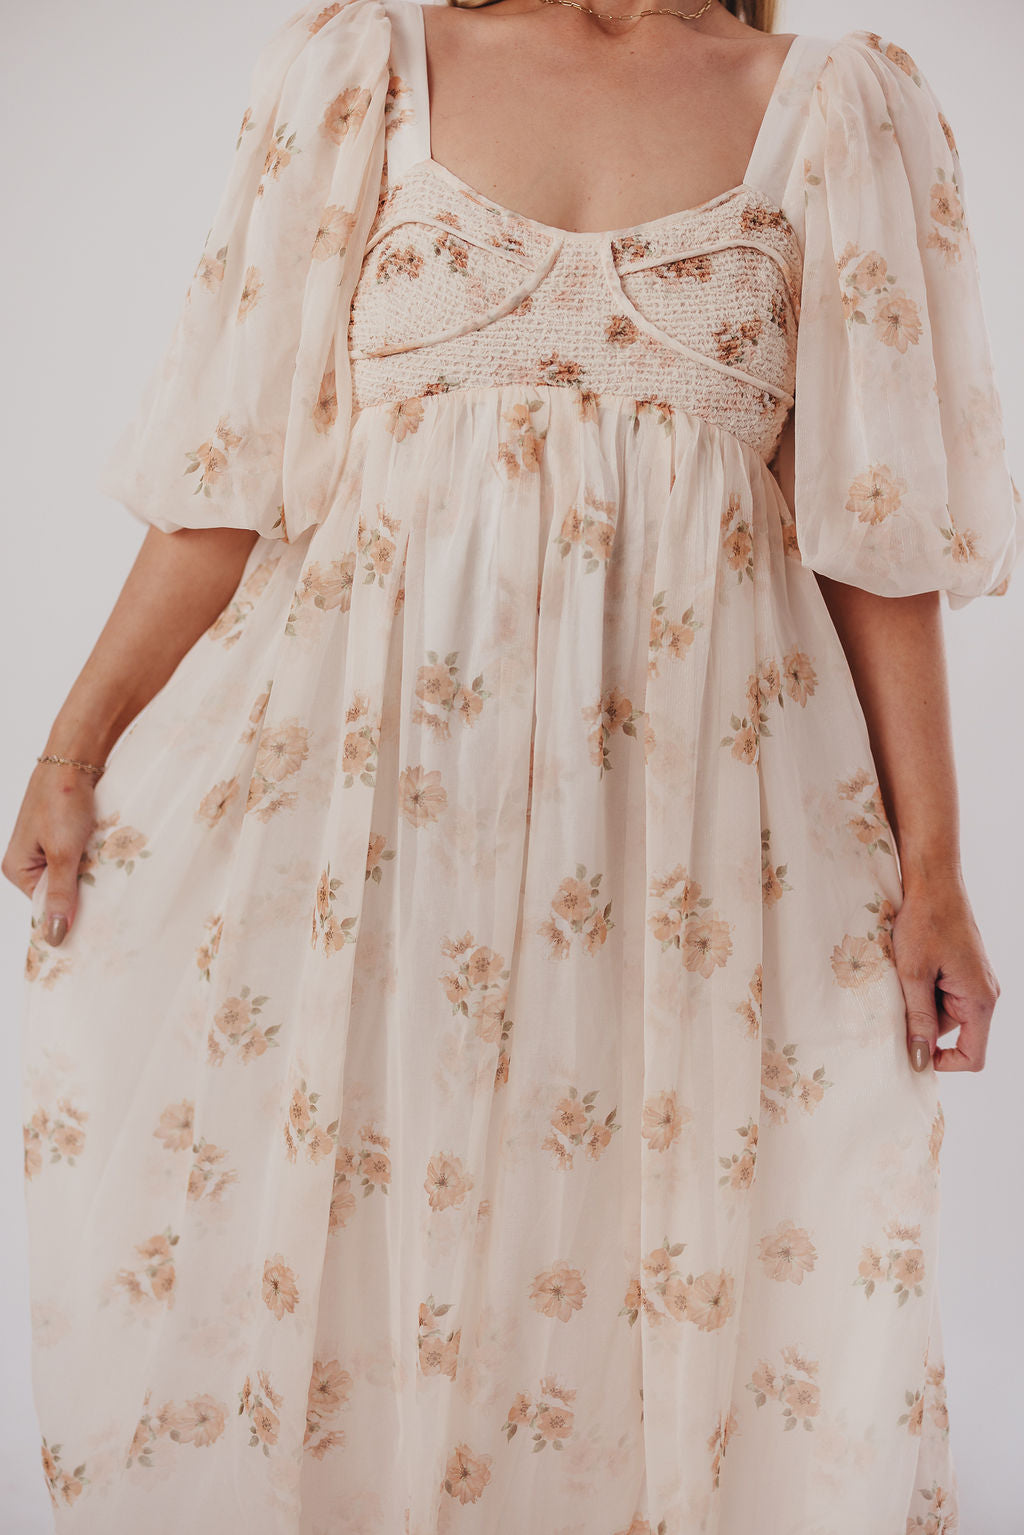 Harlow Maxi Dress in Taupe Floral - Bump Friendly & Inclusive Sizing (S-3XL)